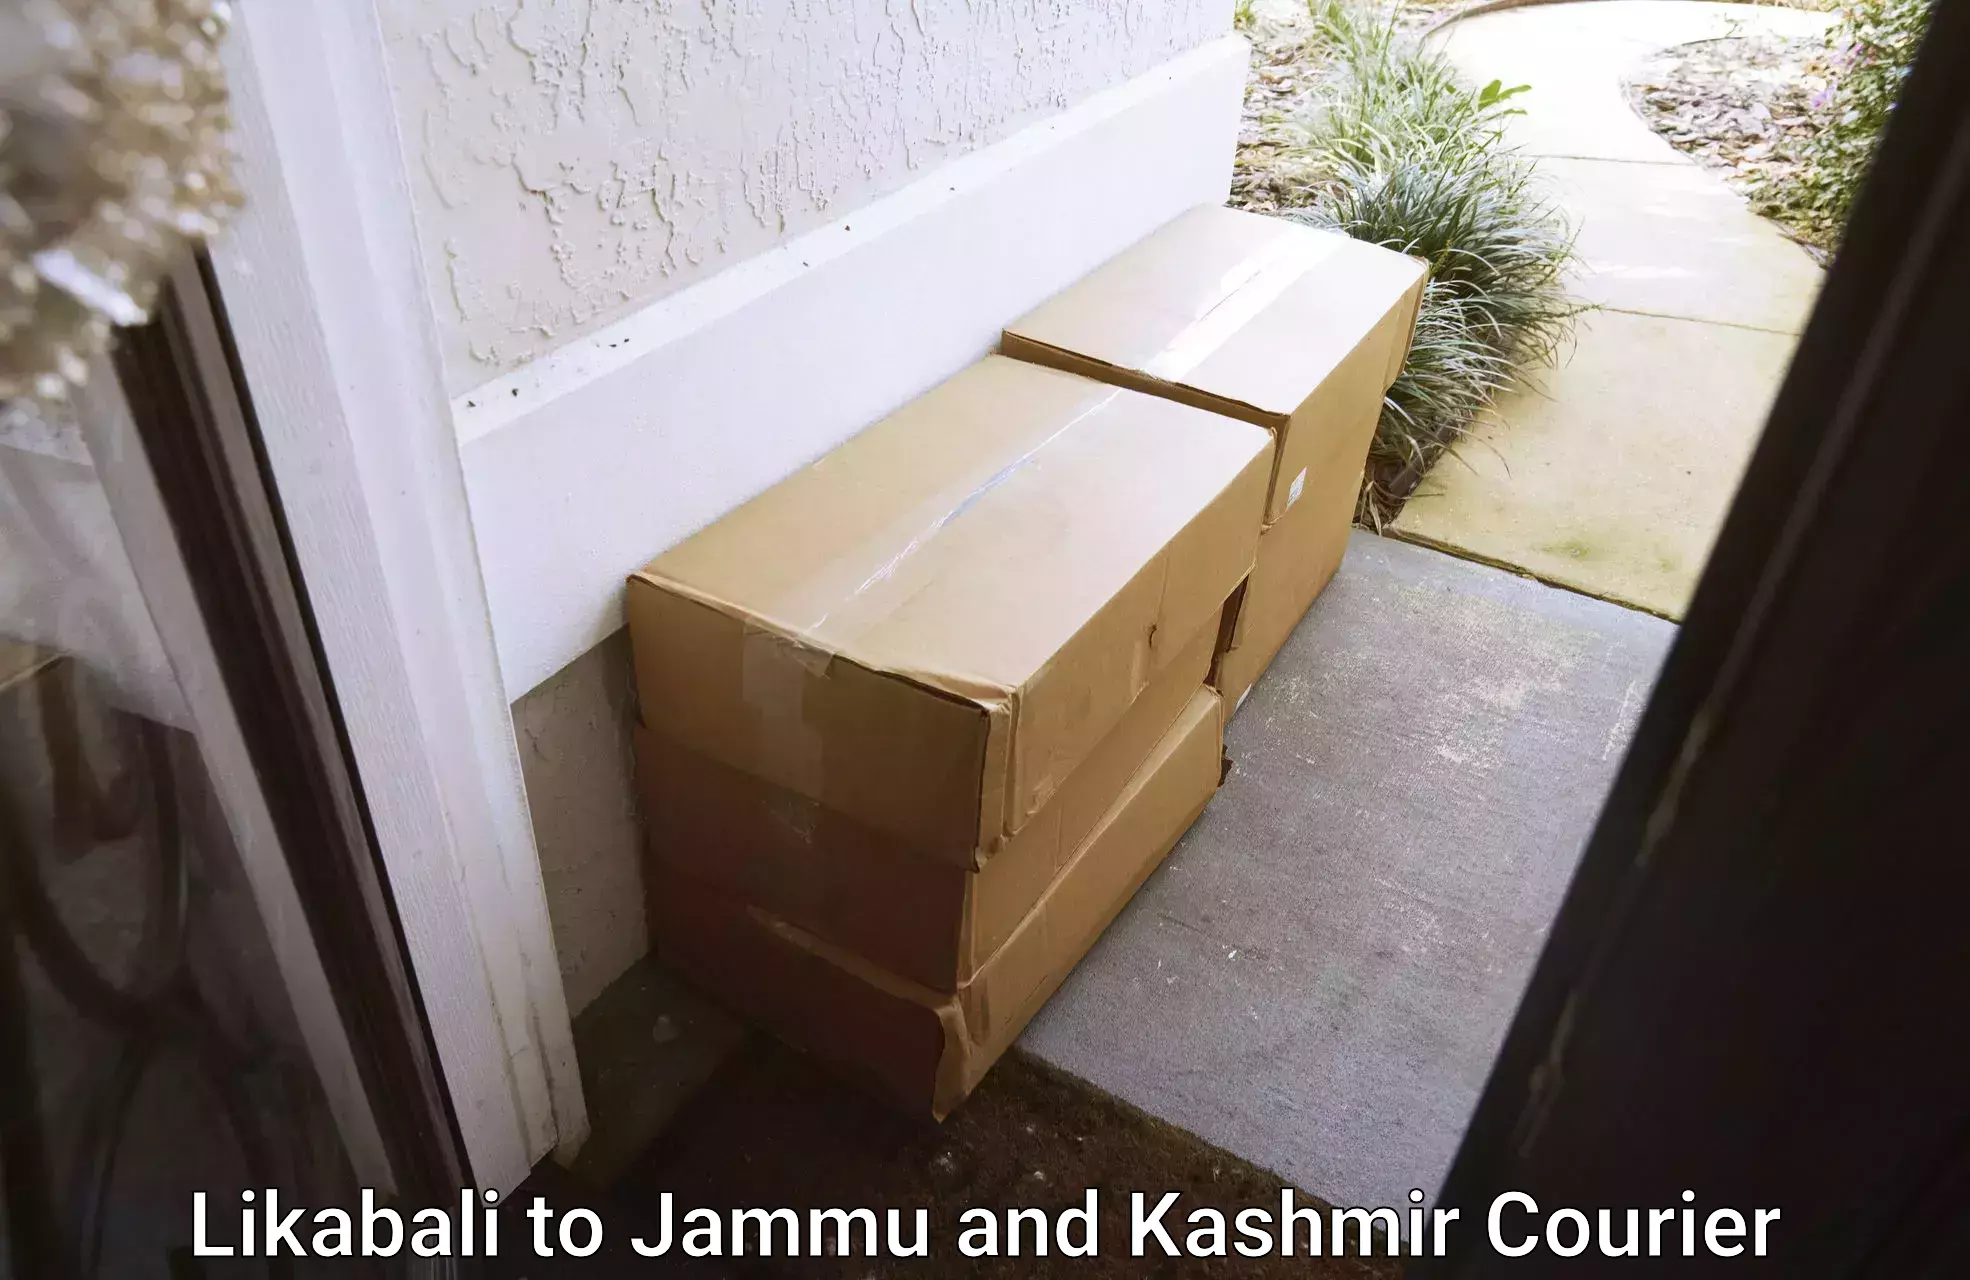 Express mail solutions Likabali to Jammu and Kashmir